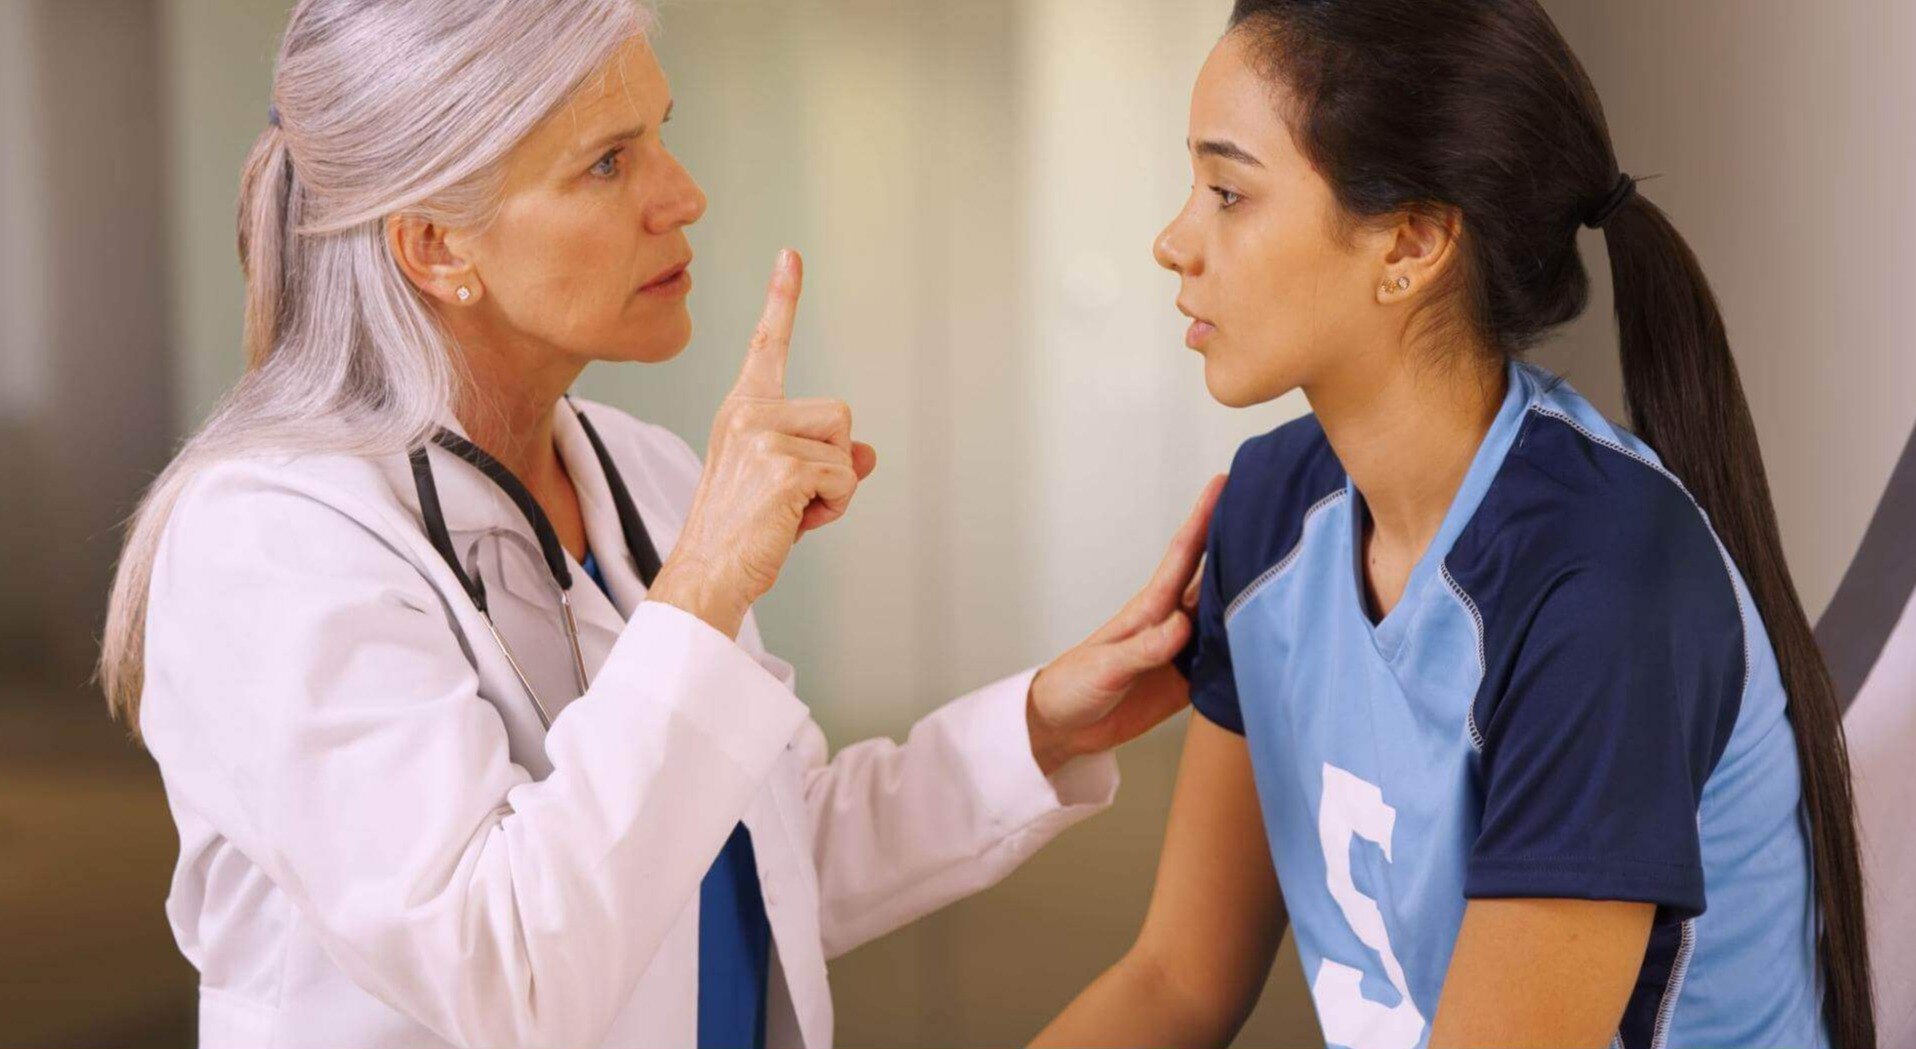 A doctor evaluates an athlete after a clash on the soccer field